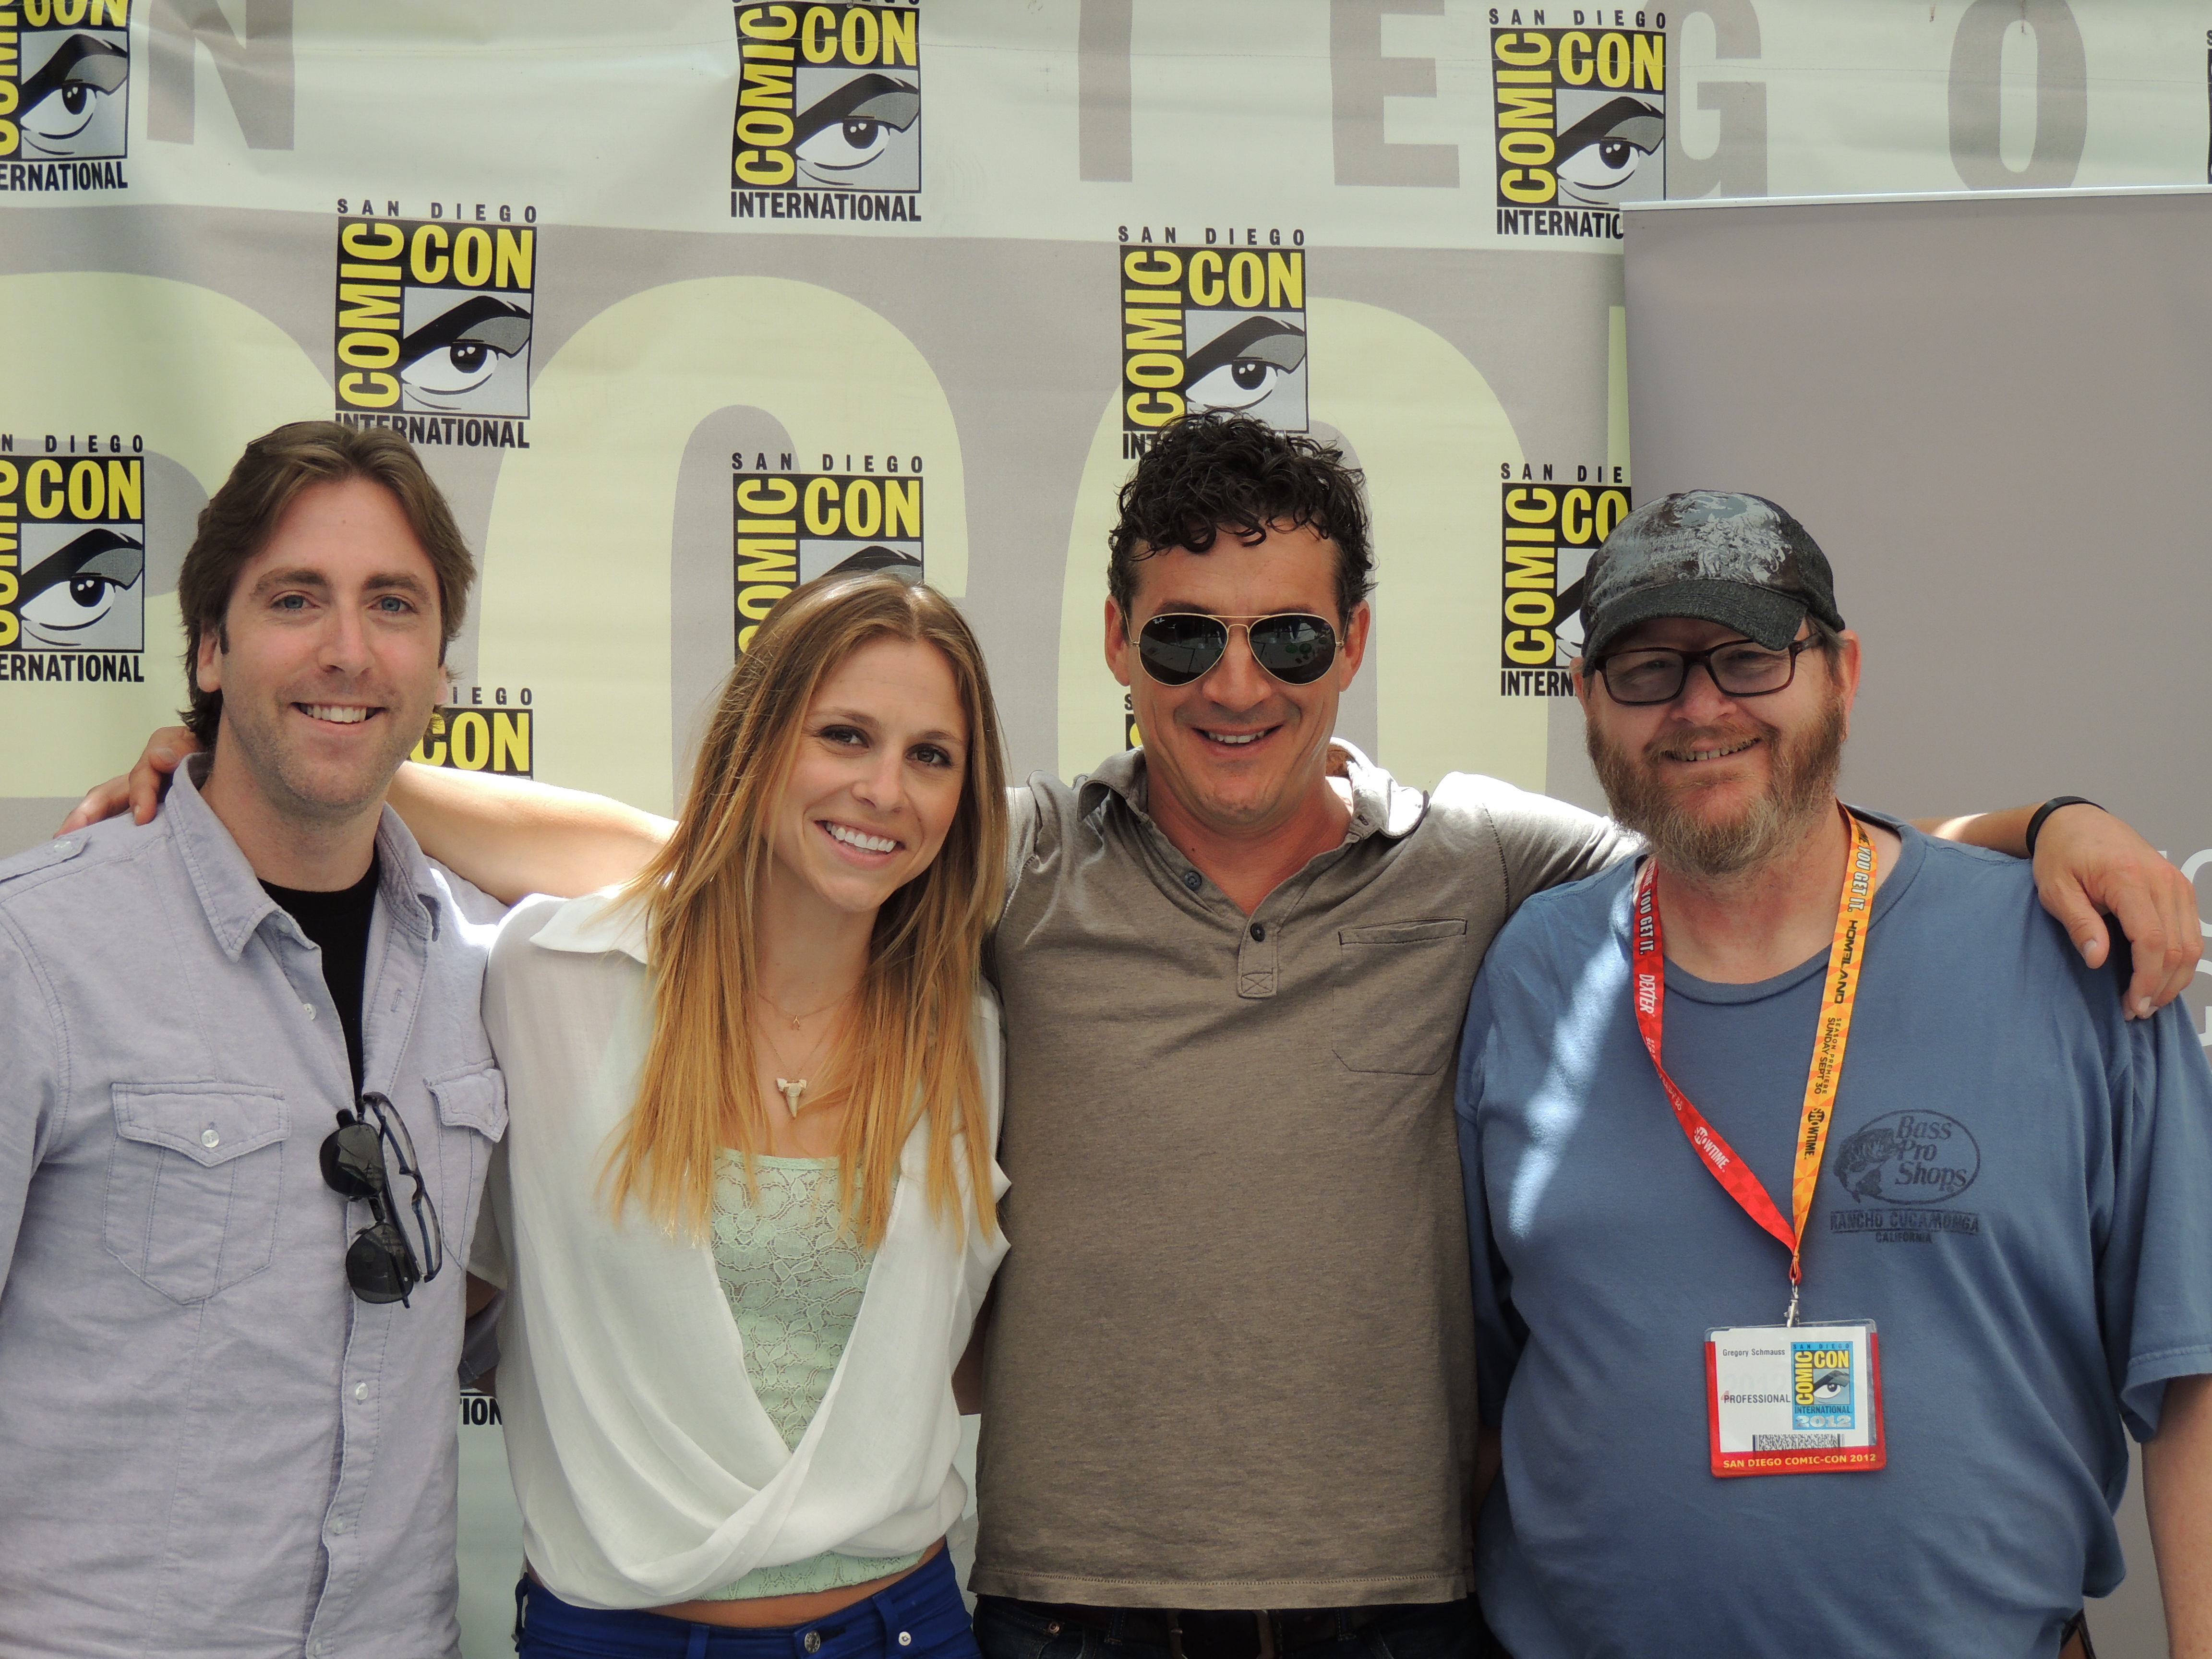 Gregory Schmauss at 2012 Comic-Con with cast from National Geographic's 